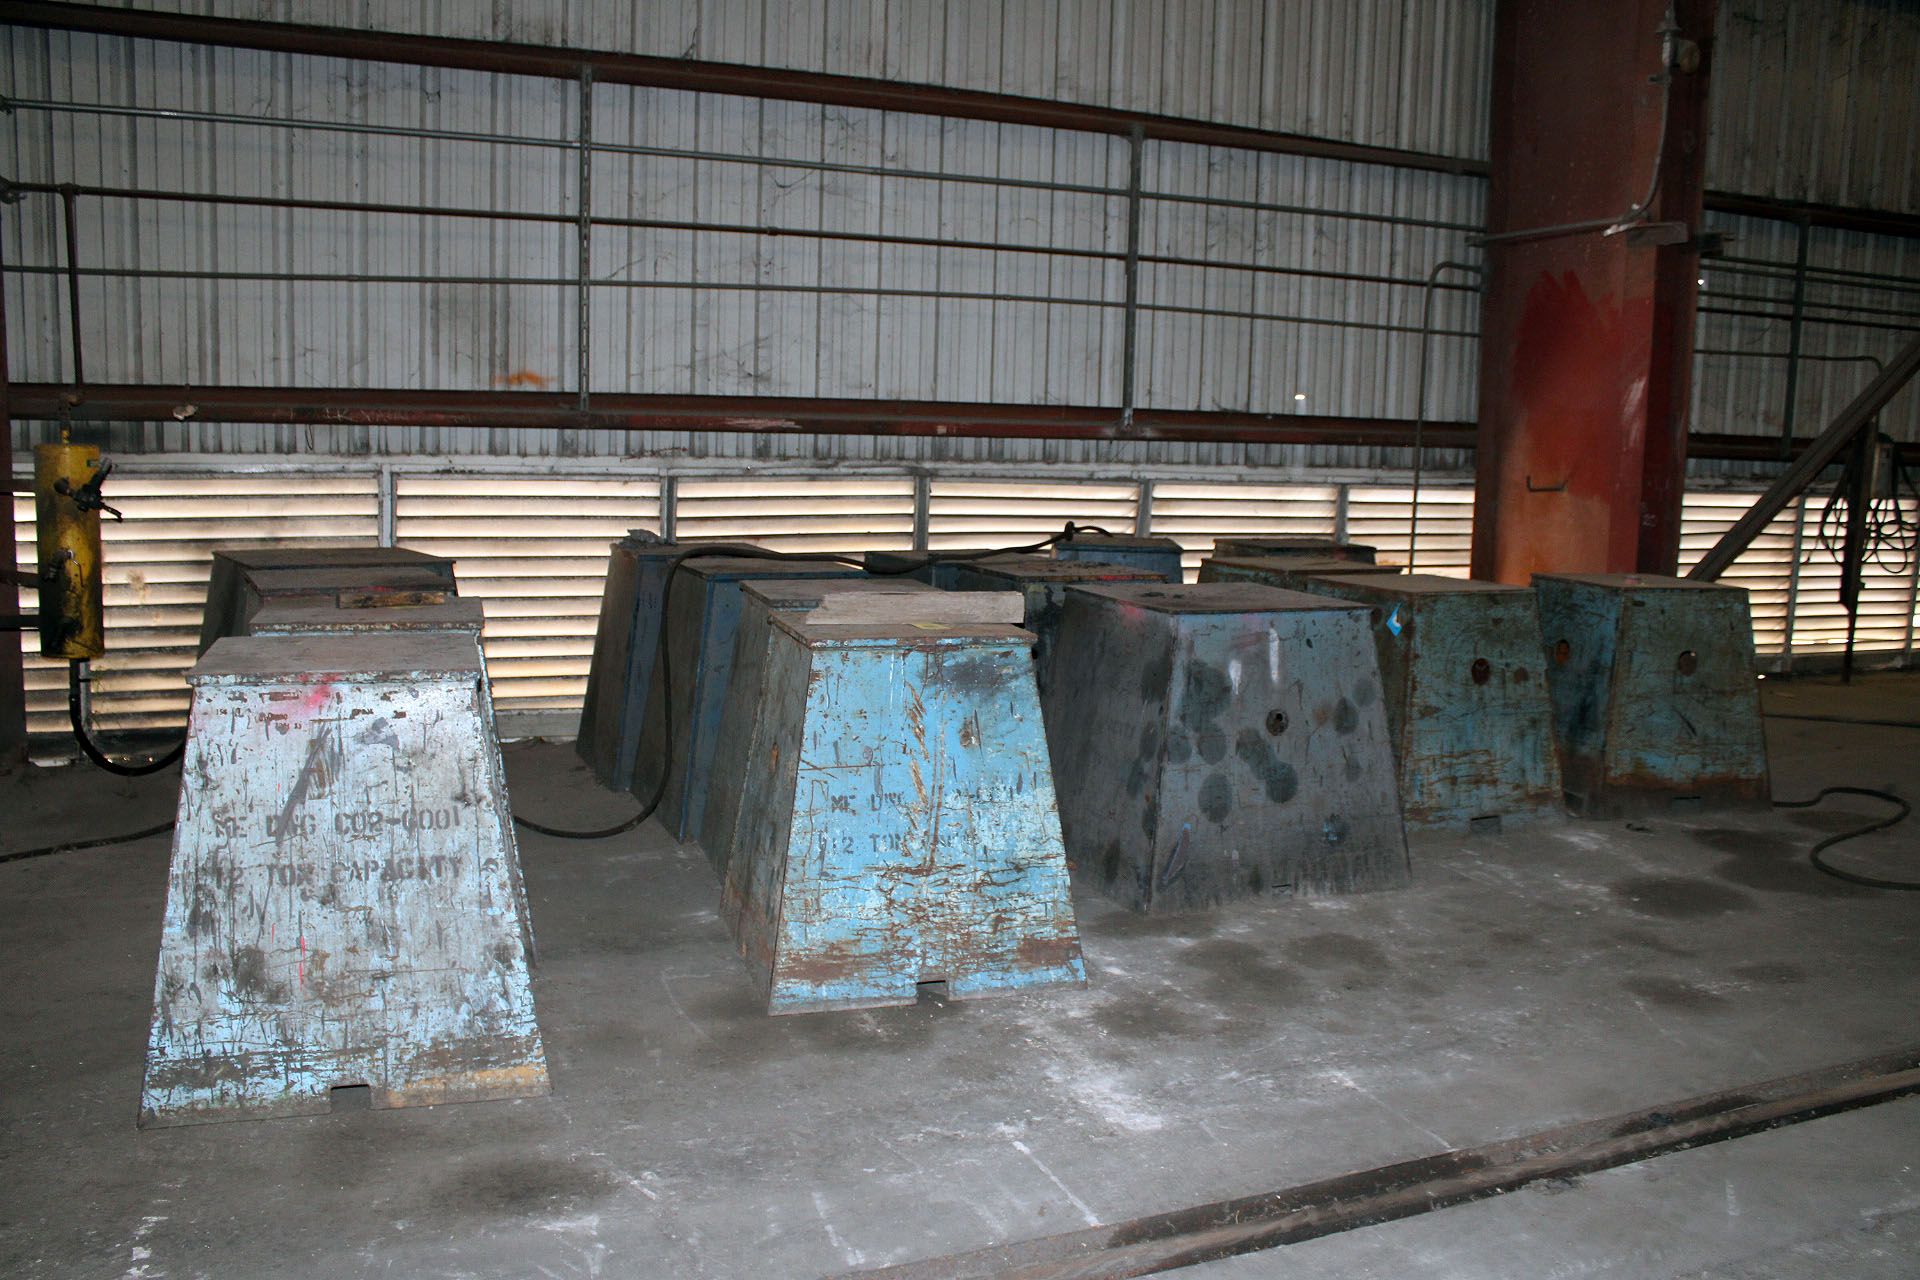 LOT OF TURNING ROLL STANDS (approx. 20), 37" ht., 24" sq. top